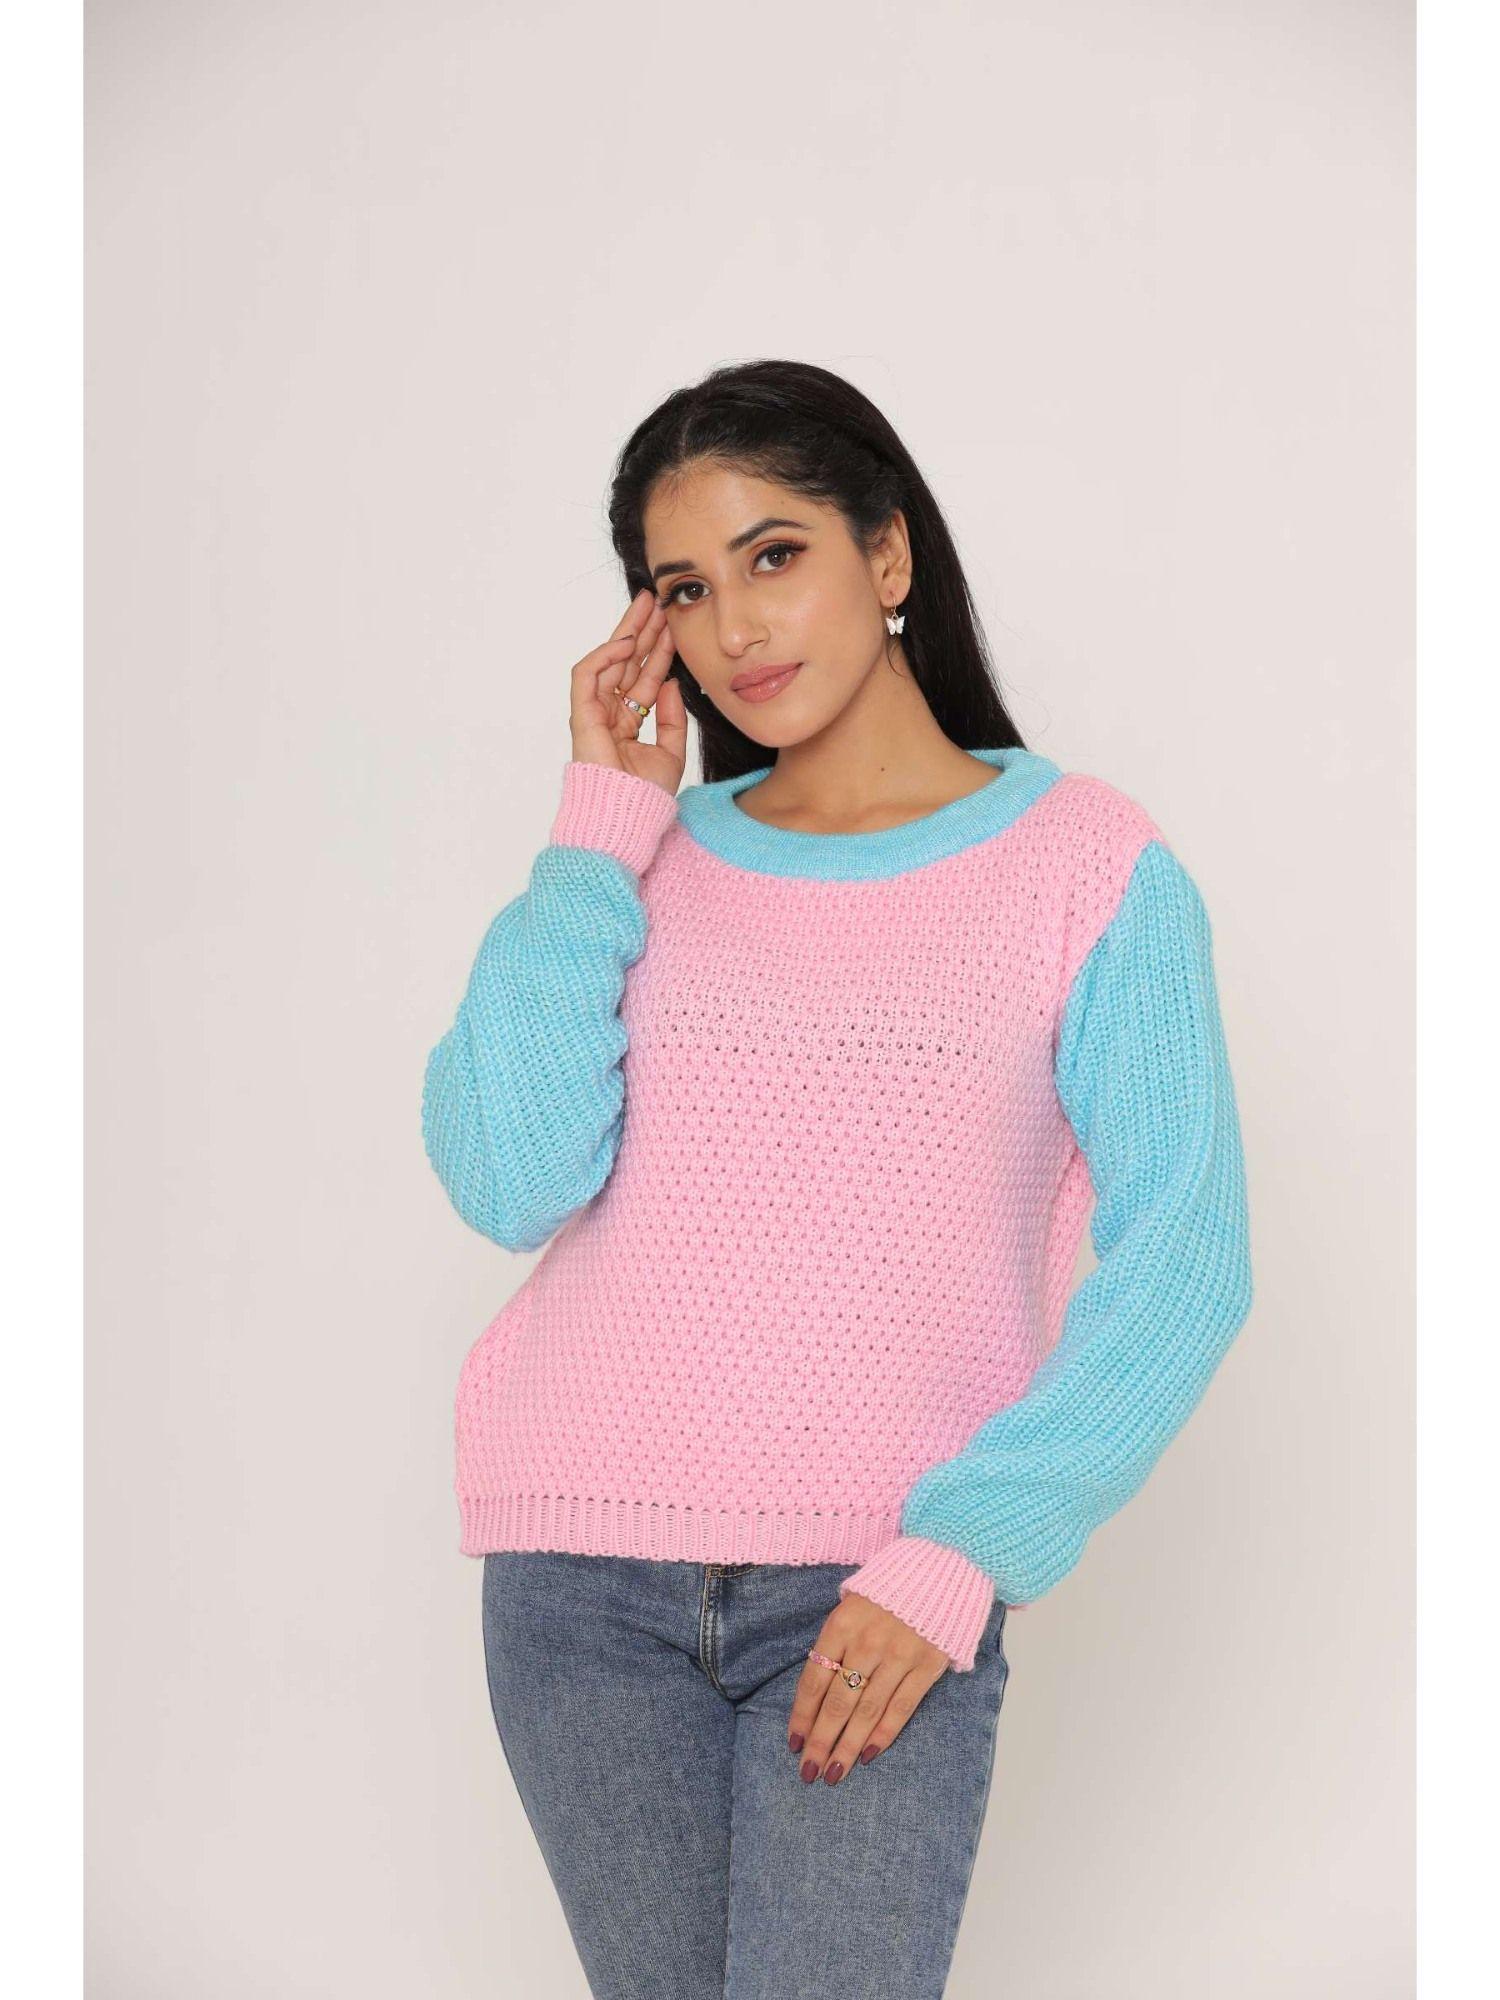 stylish oversized drop shoulders pink and blue woollen sweaters for women